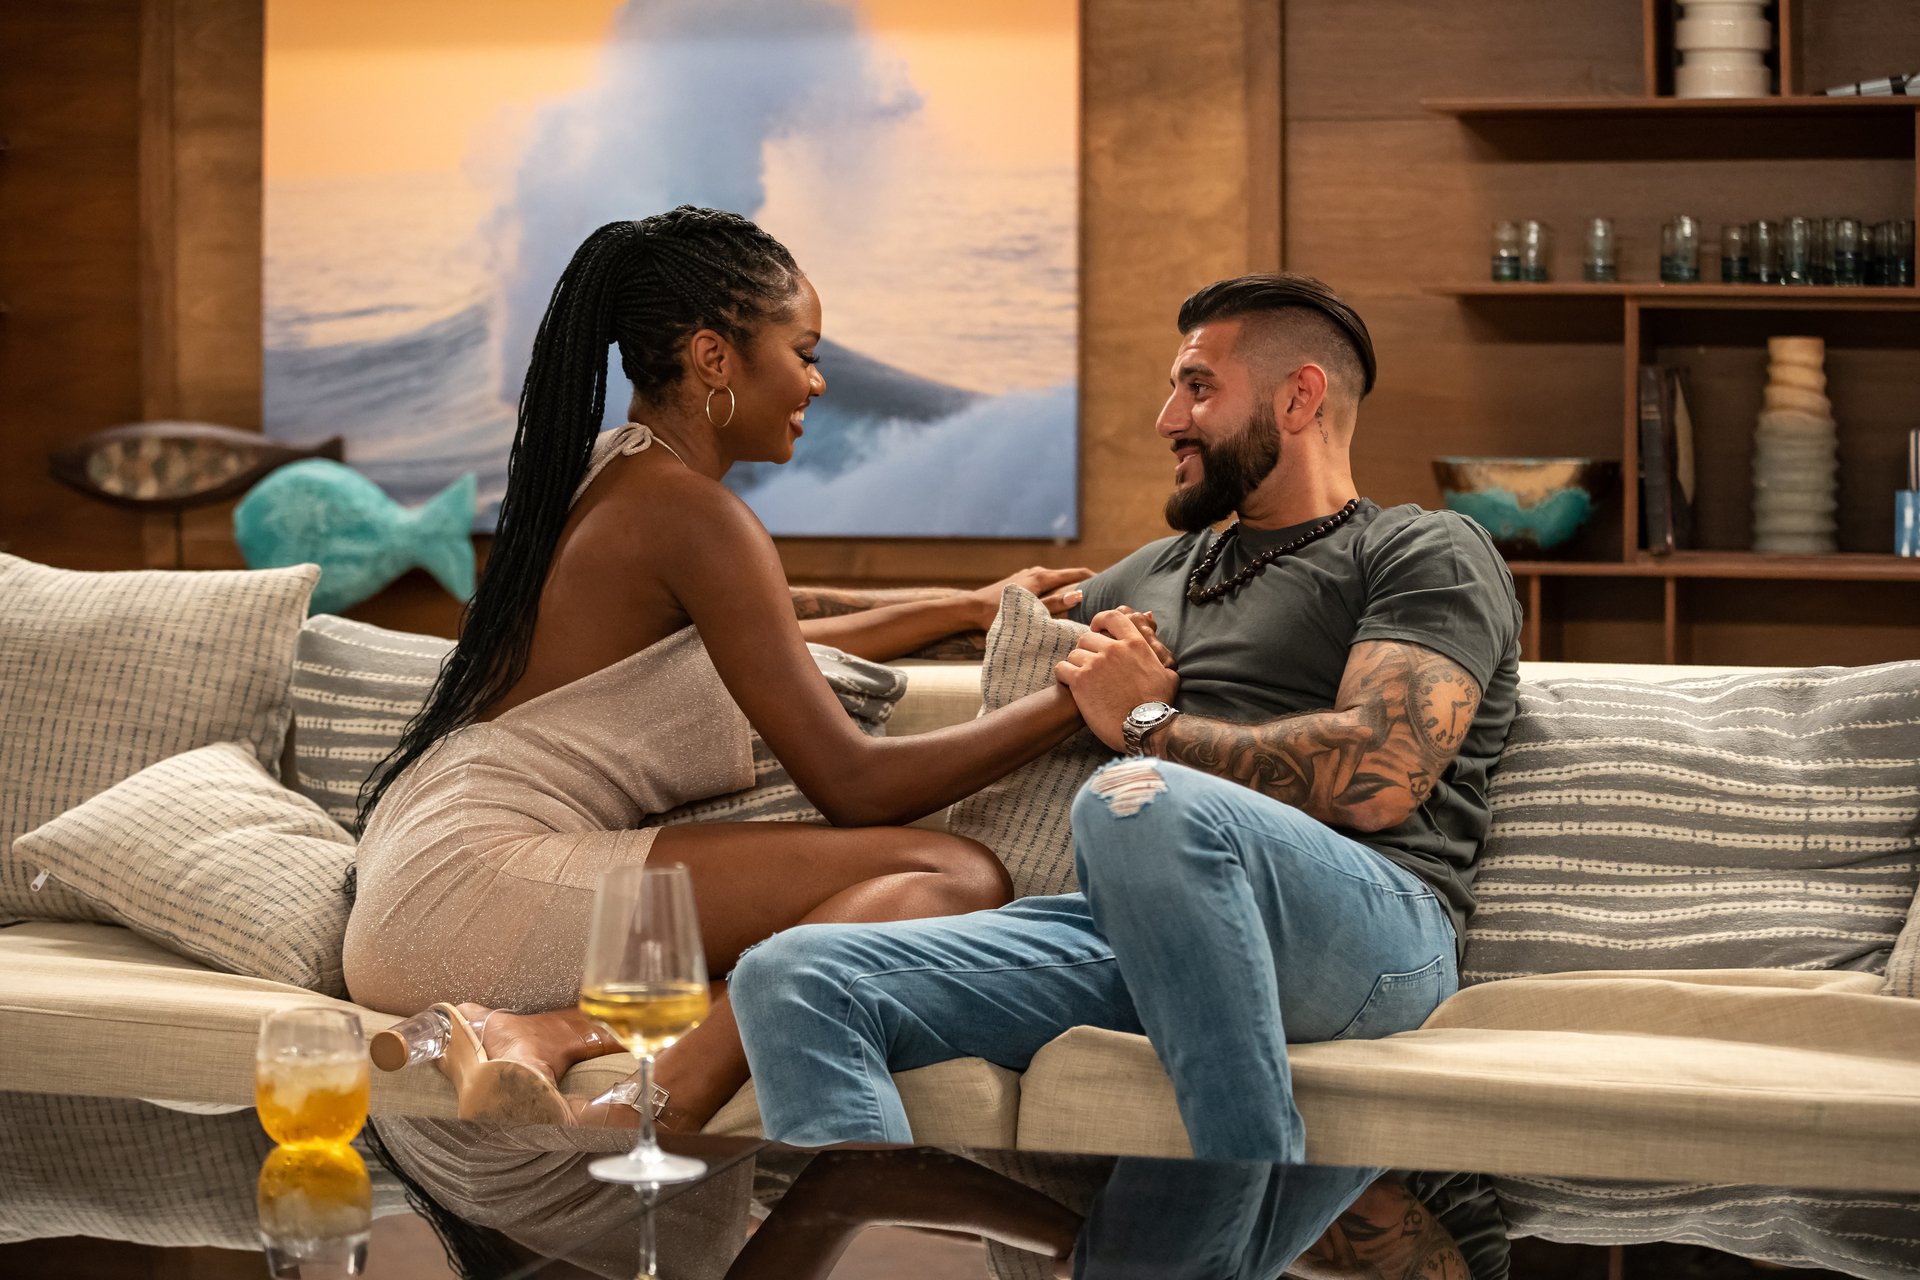 'FBoy Island' Season 2 Mia Emani Jones and Danny Louisa sitting together on a couch holding hands